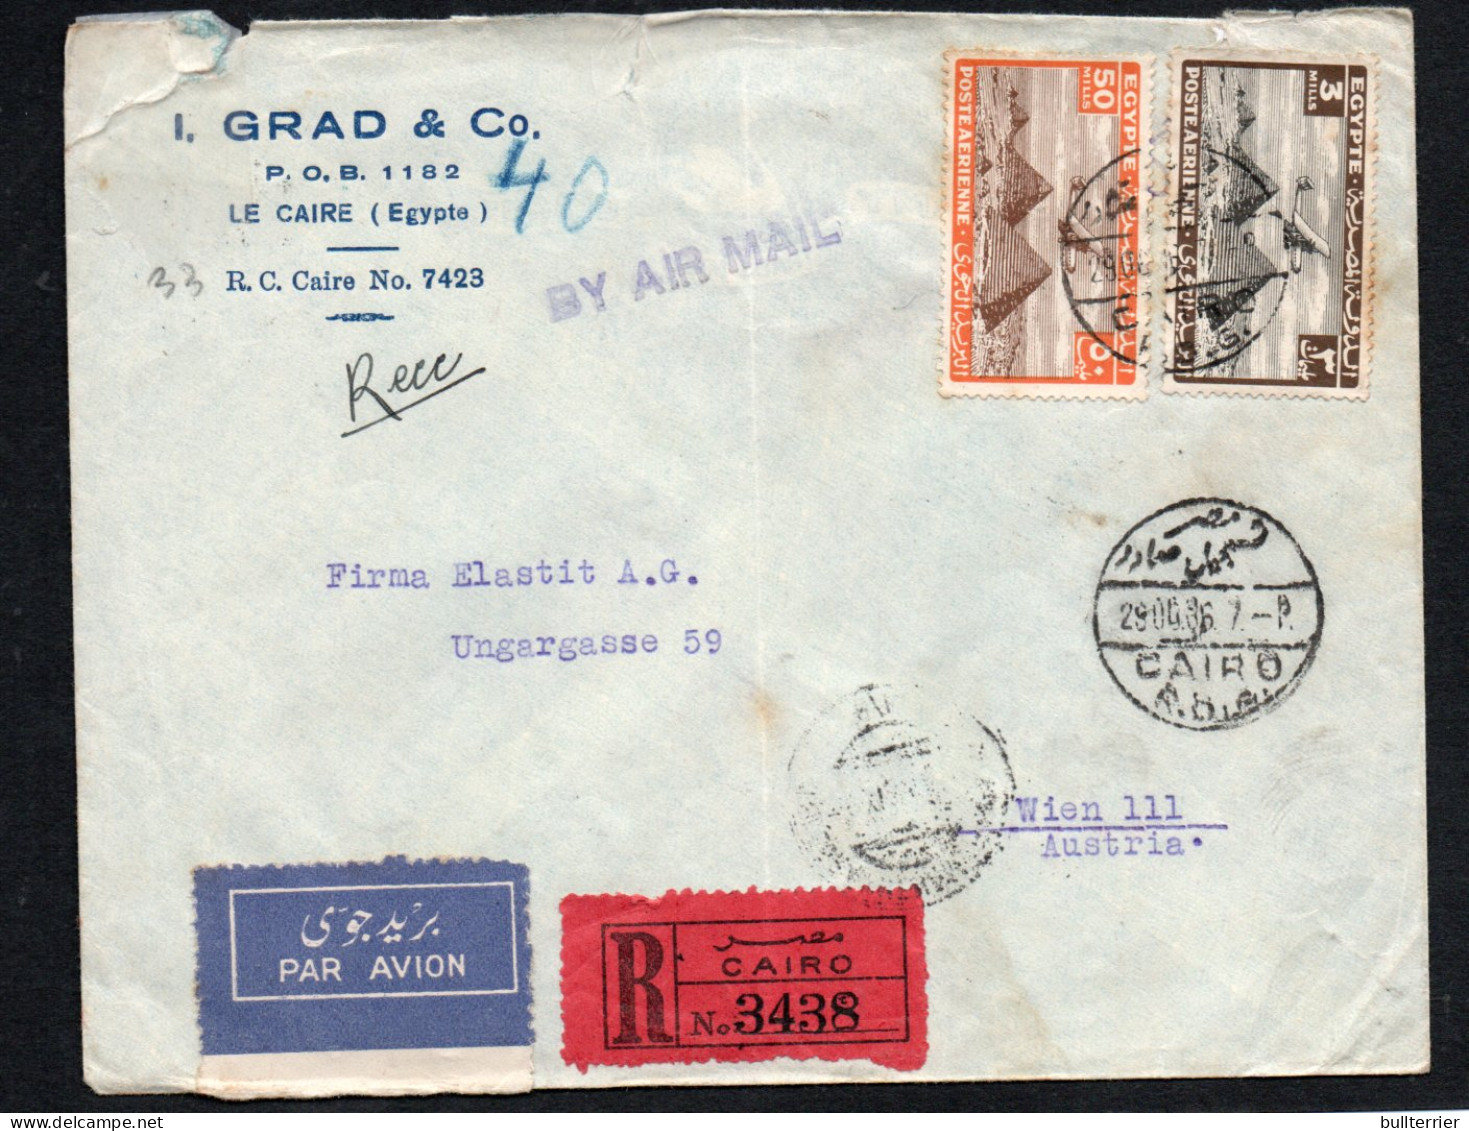 EGYPT - 1936 - IMPERIAL AIRWAYS REGISTERED COVER CAIRO TO VIENNA ,AUSTRIA WITH BACKSTAMP - Lettres & Documents